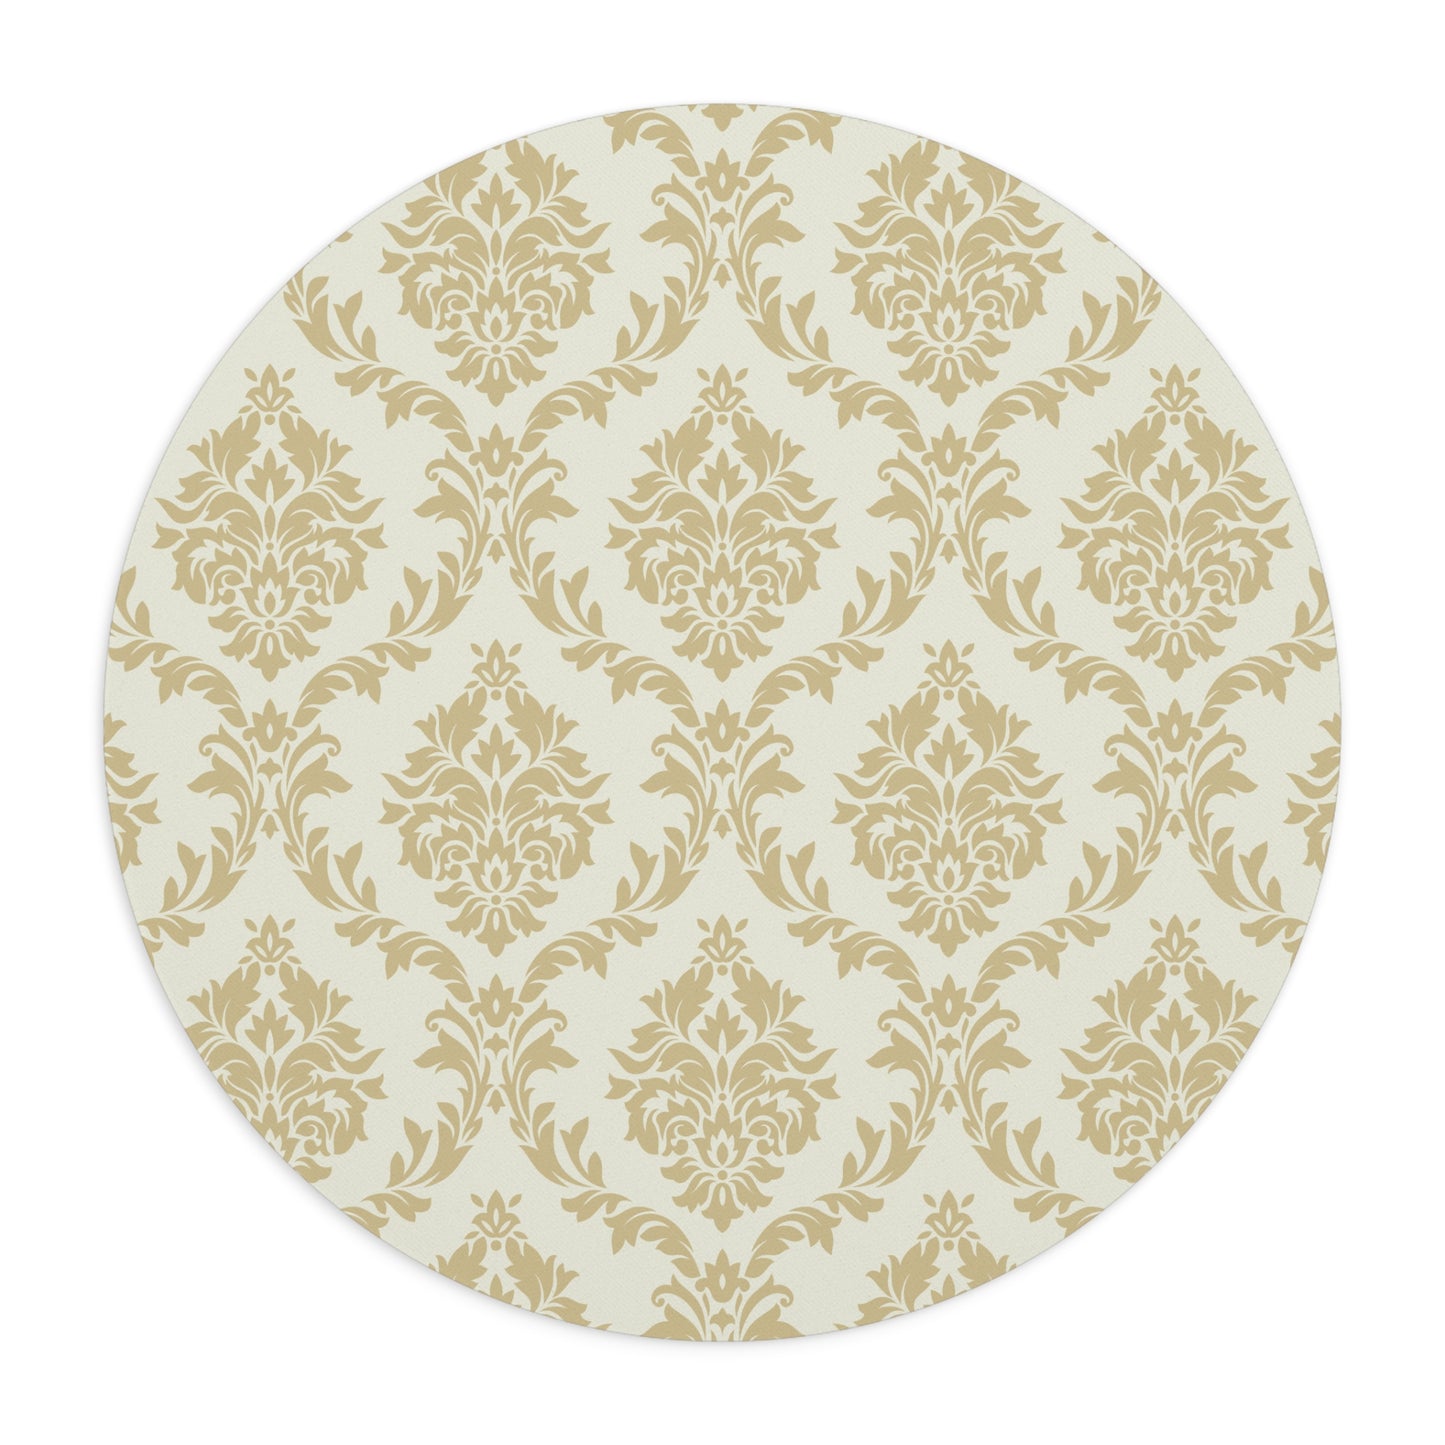 Beige Damask Mouse Pad